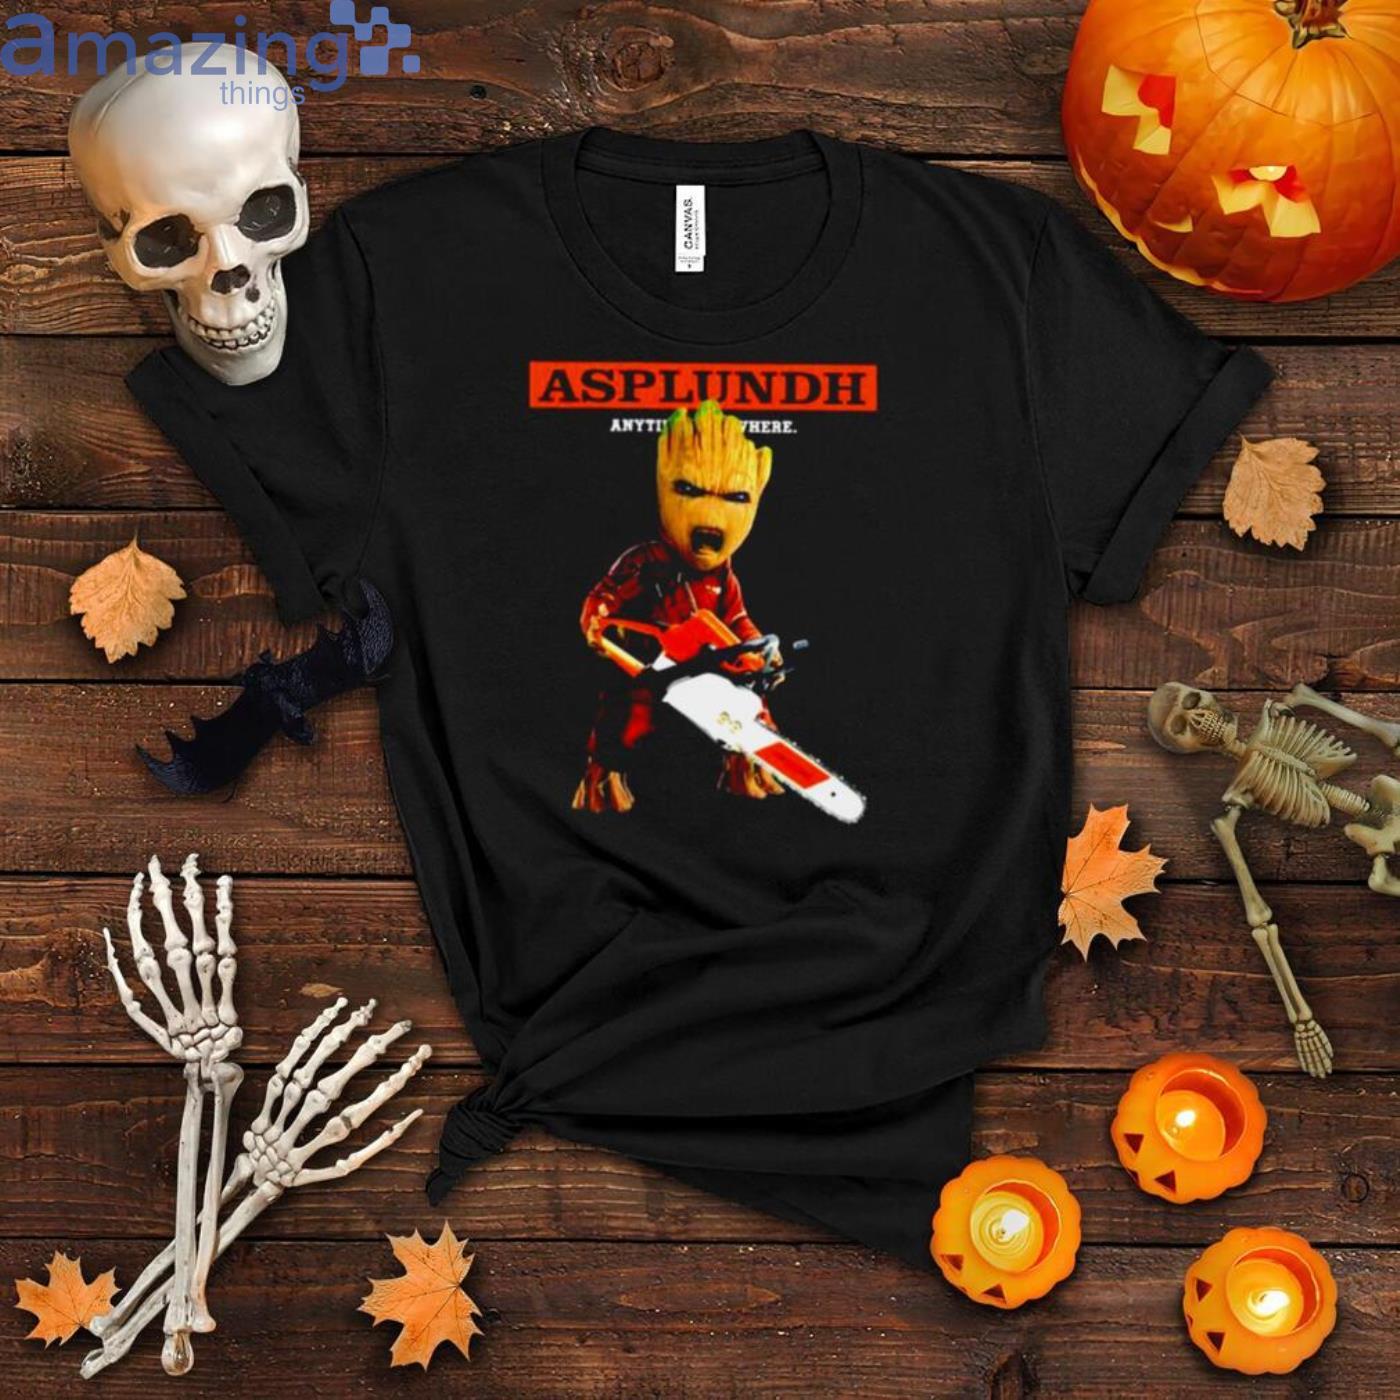 Baby Groot Asplundh Anytime Anywhere Shirt Product Photo 1